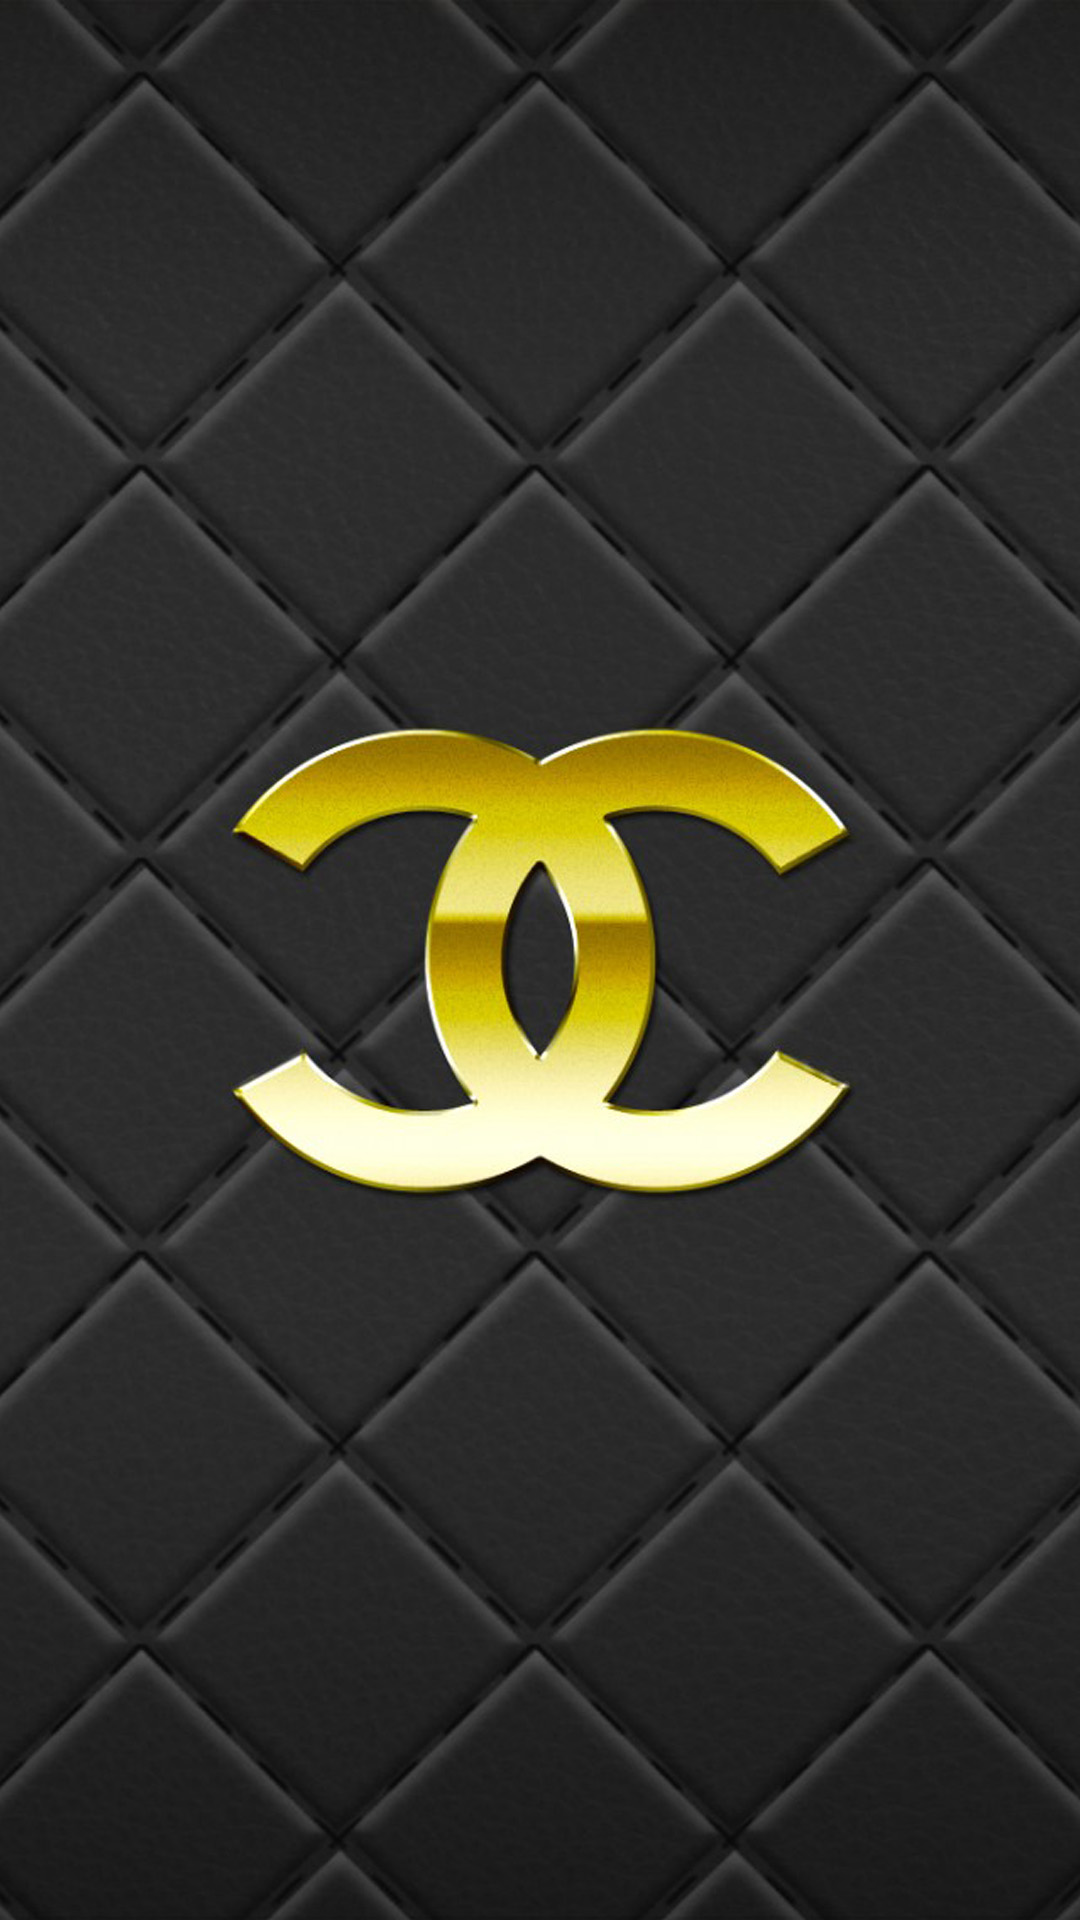 Coco Chanel Hd Wallpapers For Laptop  Wallpaperforu